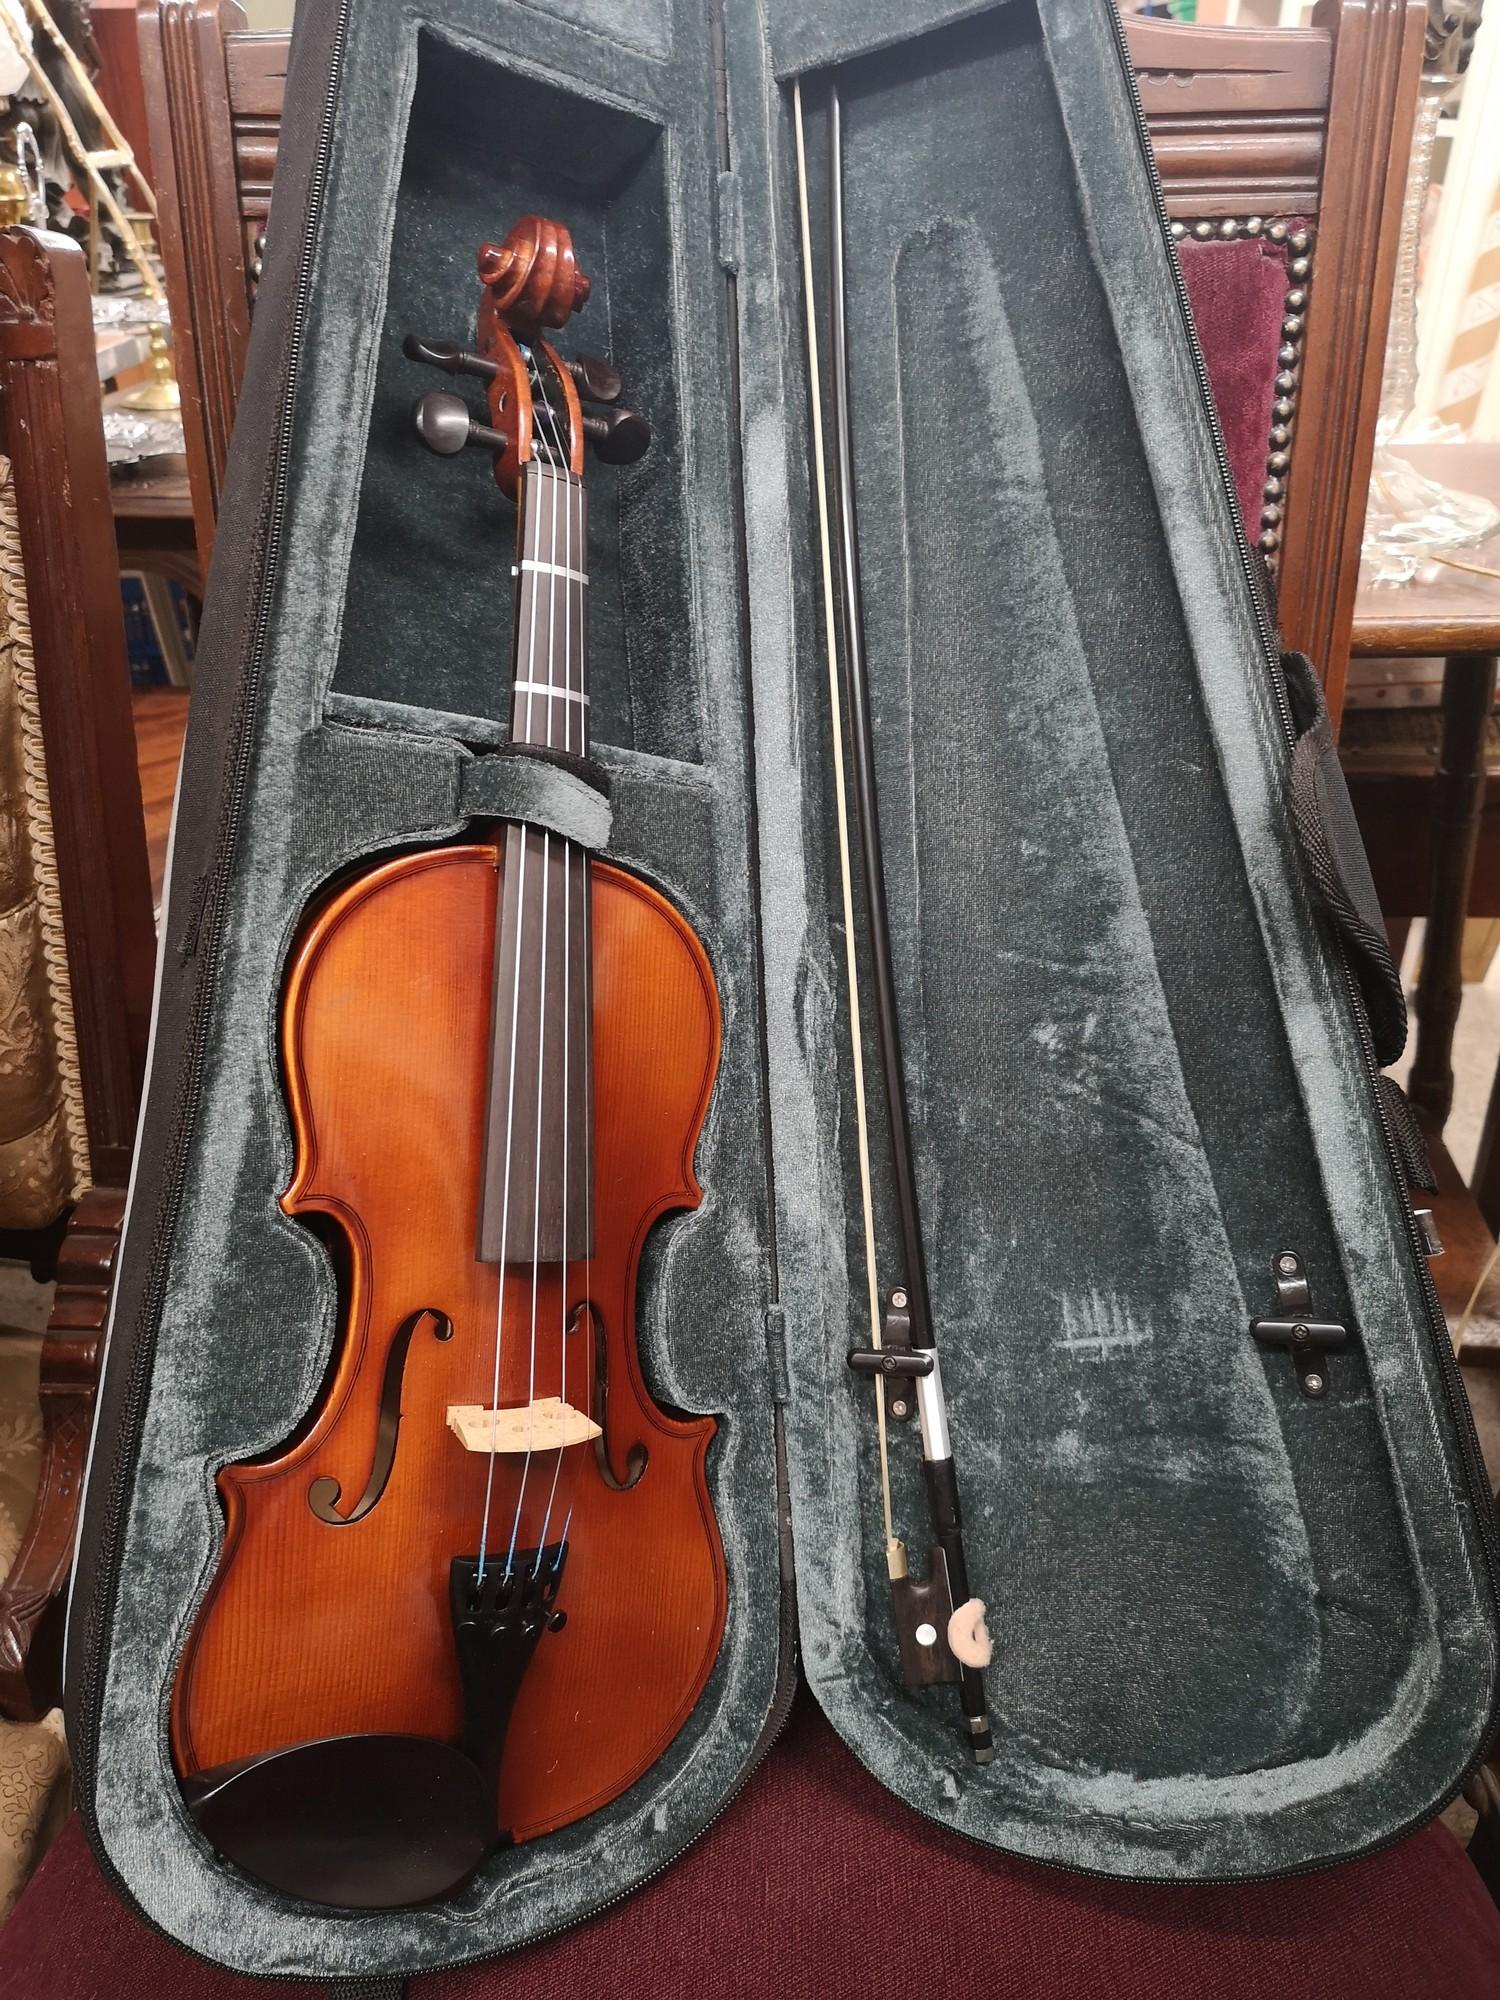 Primavera model number 209 violin with case and bow.